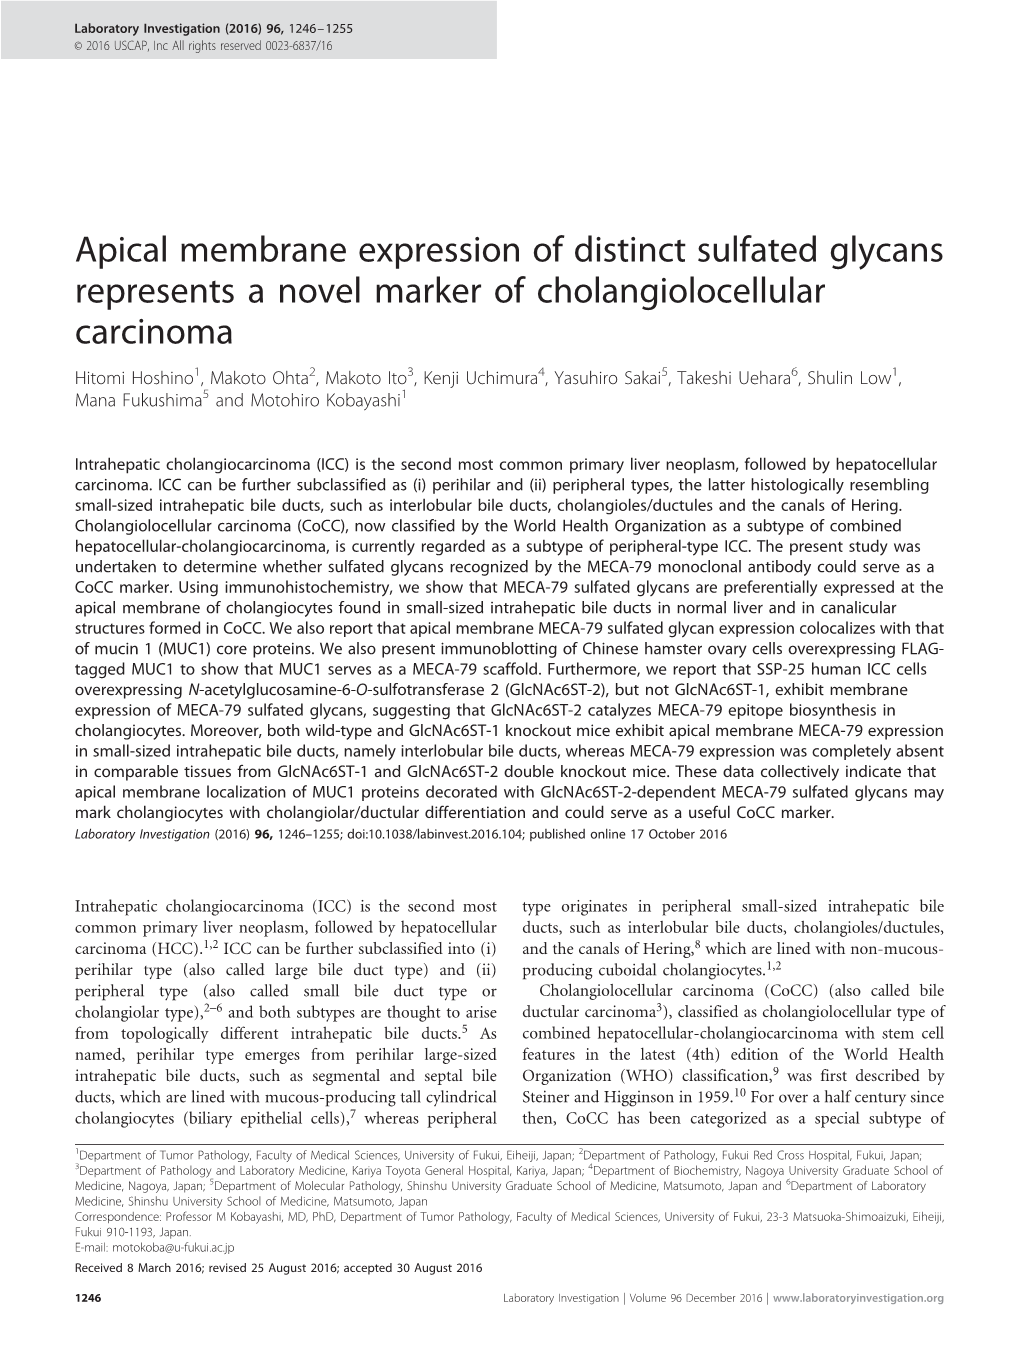 Apical Membrane Expression of Distinct Sulfated Glycans Represents a Novel Marker of Cholangiolocellular Carcinoma